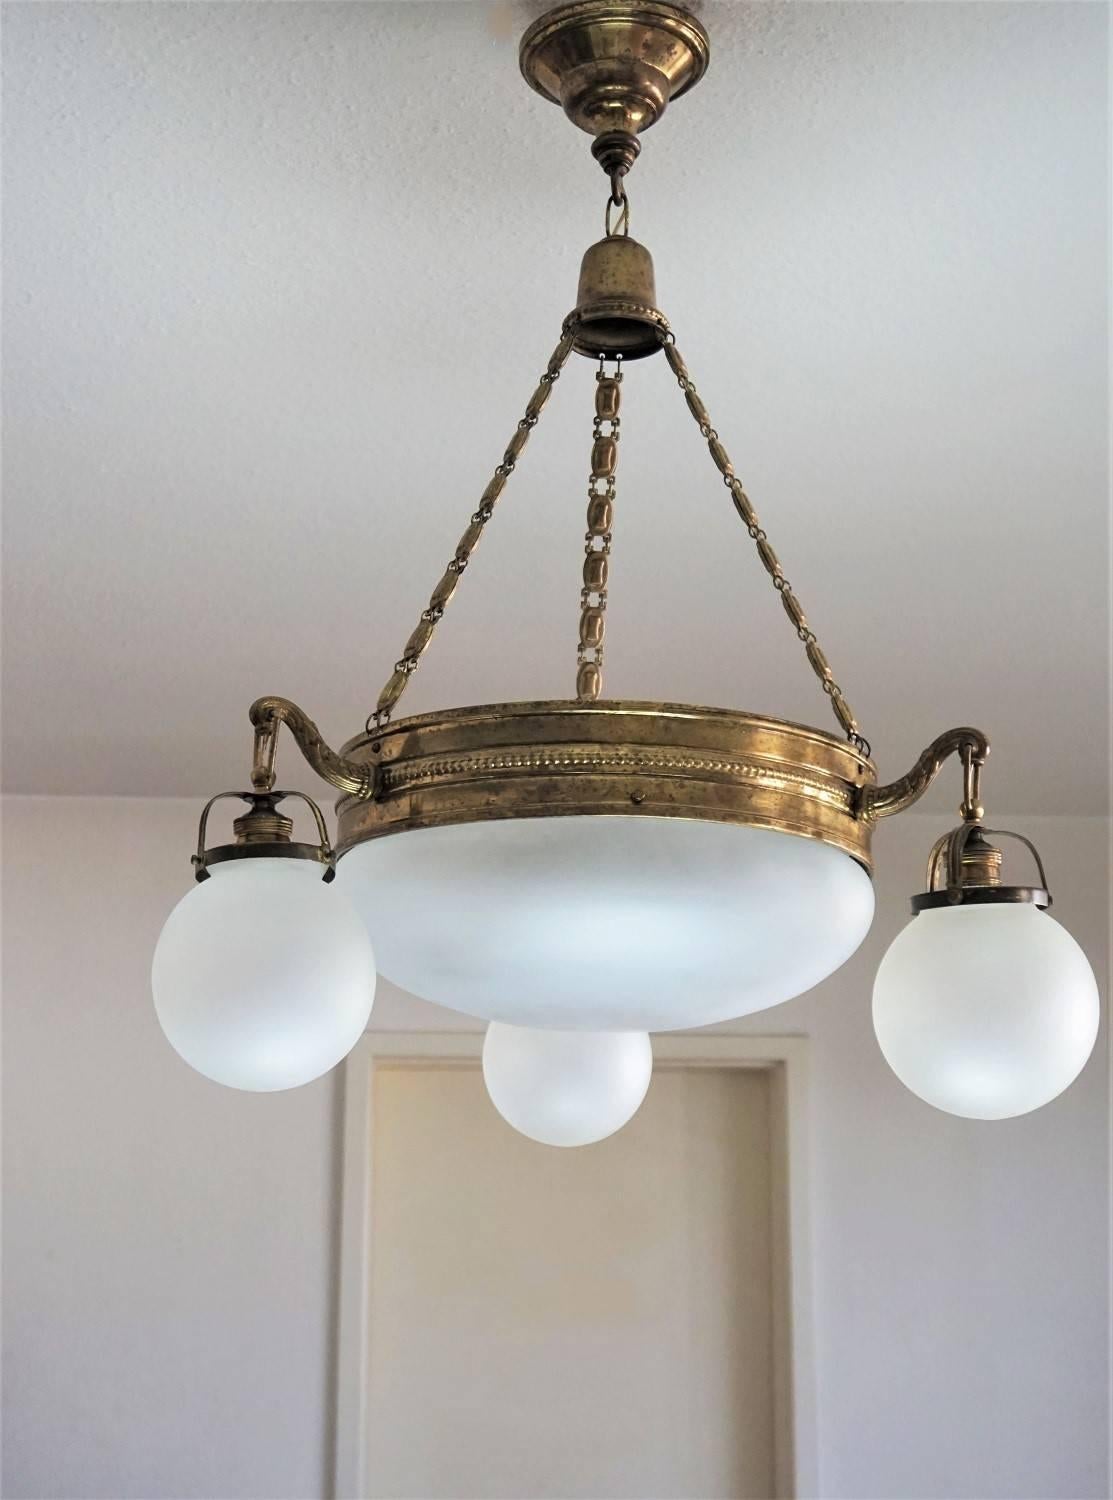 Italian Art Deco brass four-light chandelier frosted glass in original condition, ca. 1920. Large brass disc with bowl shade and thee lamp arms with ball globes.

Four large bulb sockets
Measures:
Height 29.50 in (75 cm)
Diameter 21.50 in (55 cm)

 